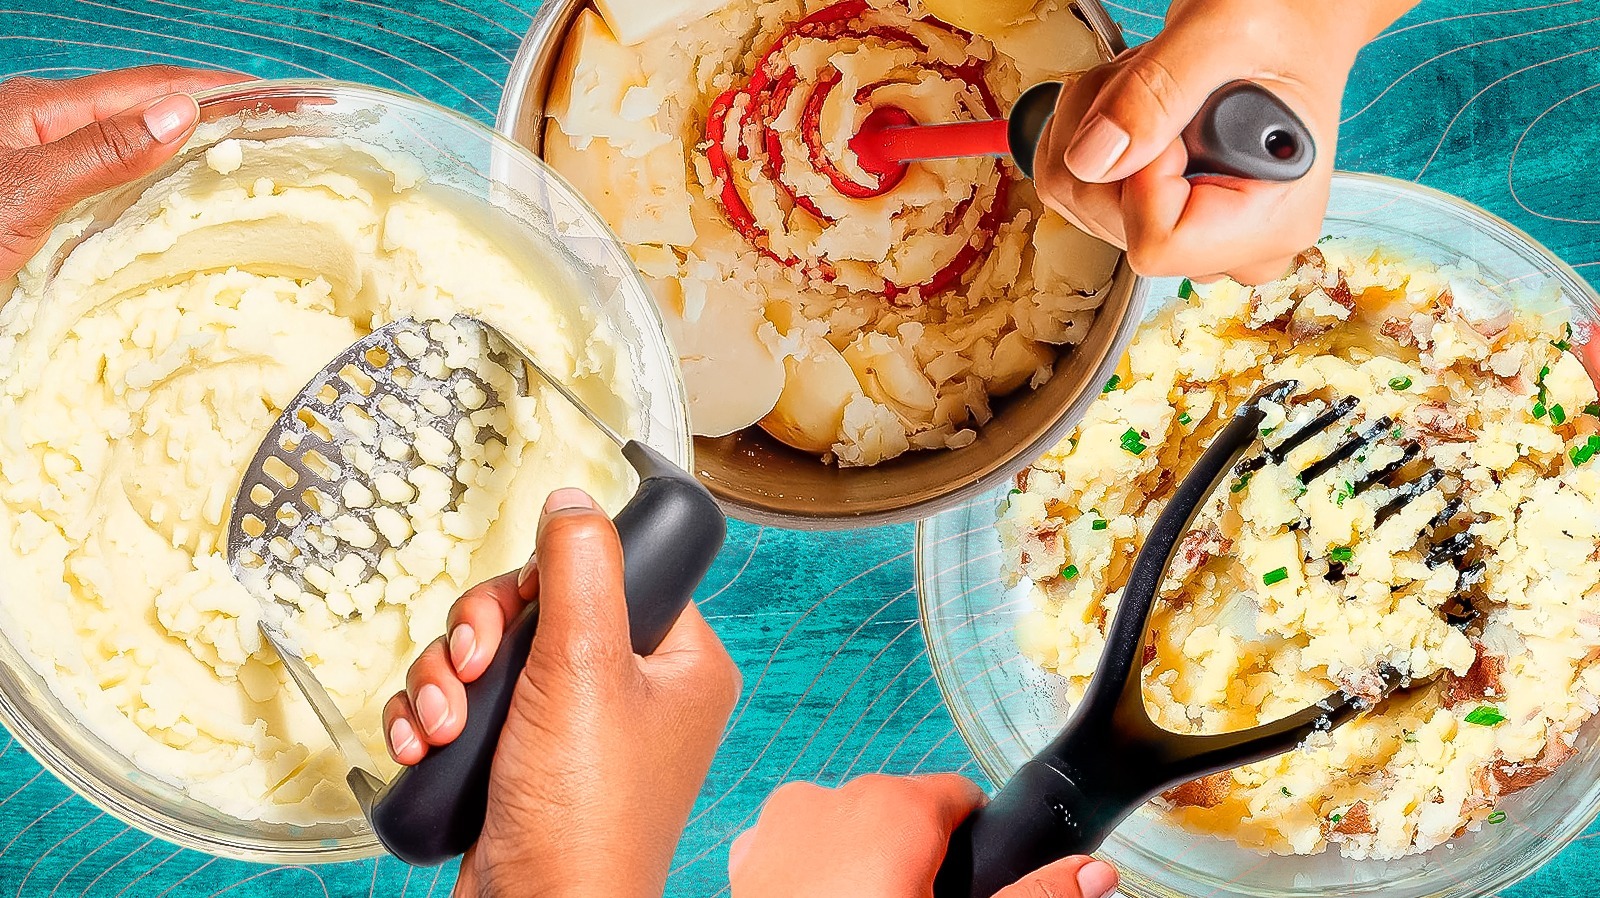 https://www.tastingtable.com/img/gallery/the-9-best-potato-mashers-that-actually-do-the-job-and-more/l-intro-1694715672.jpg